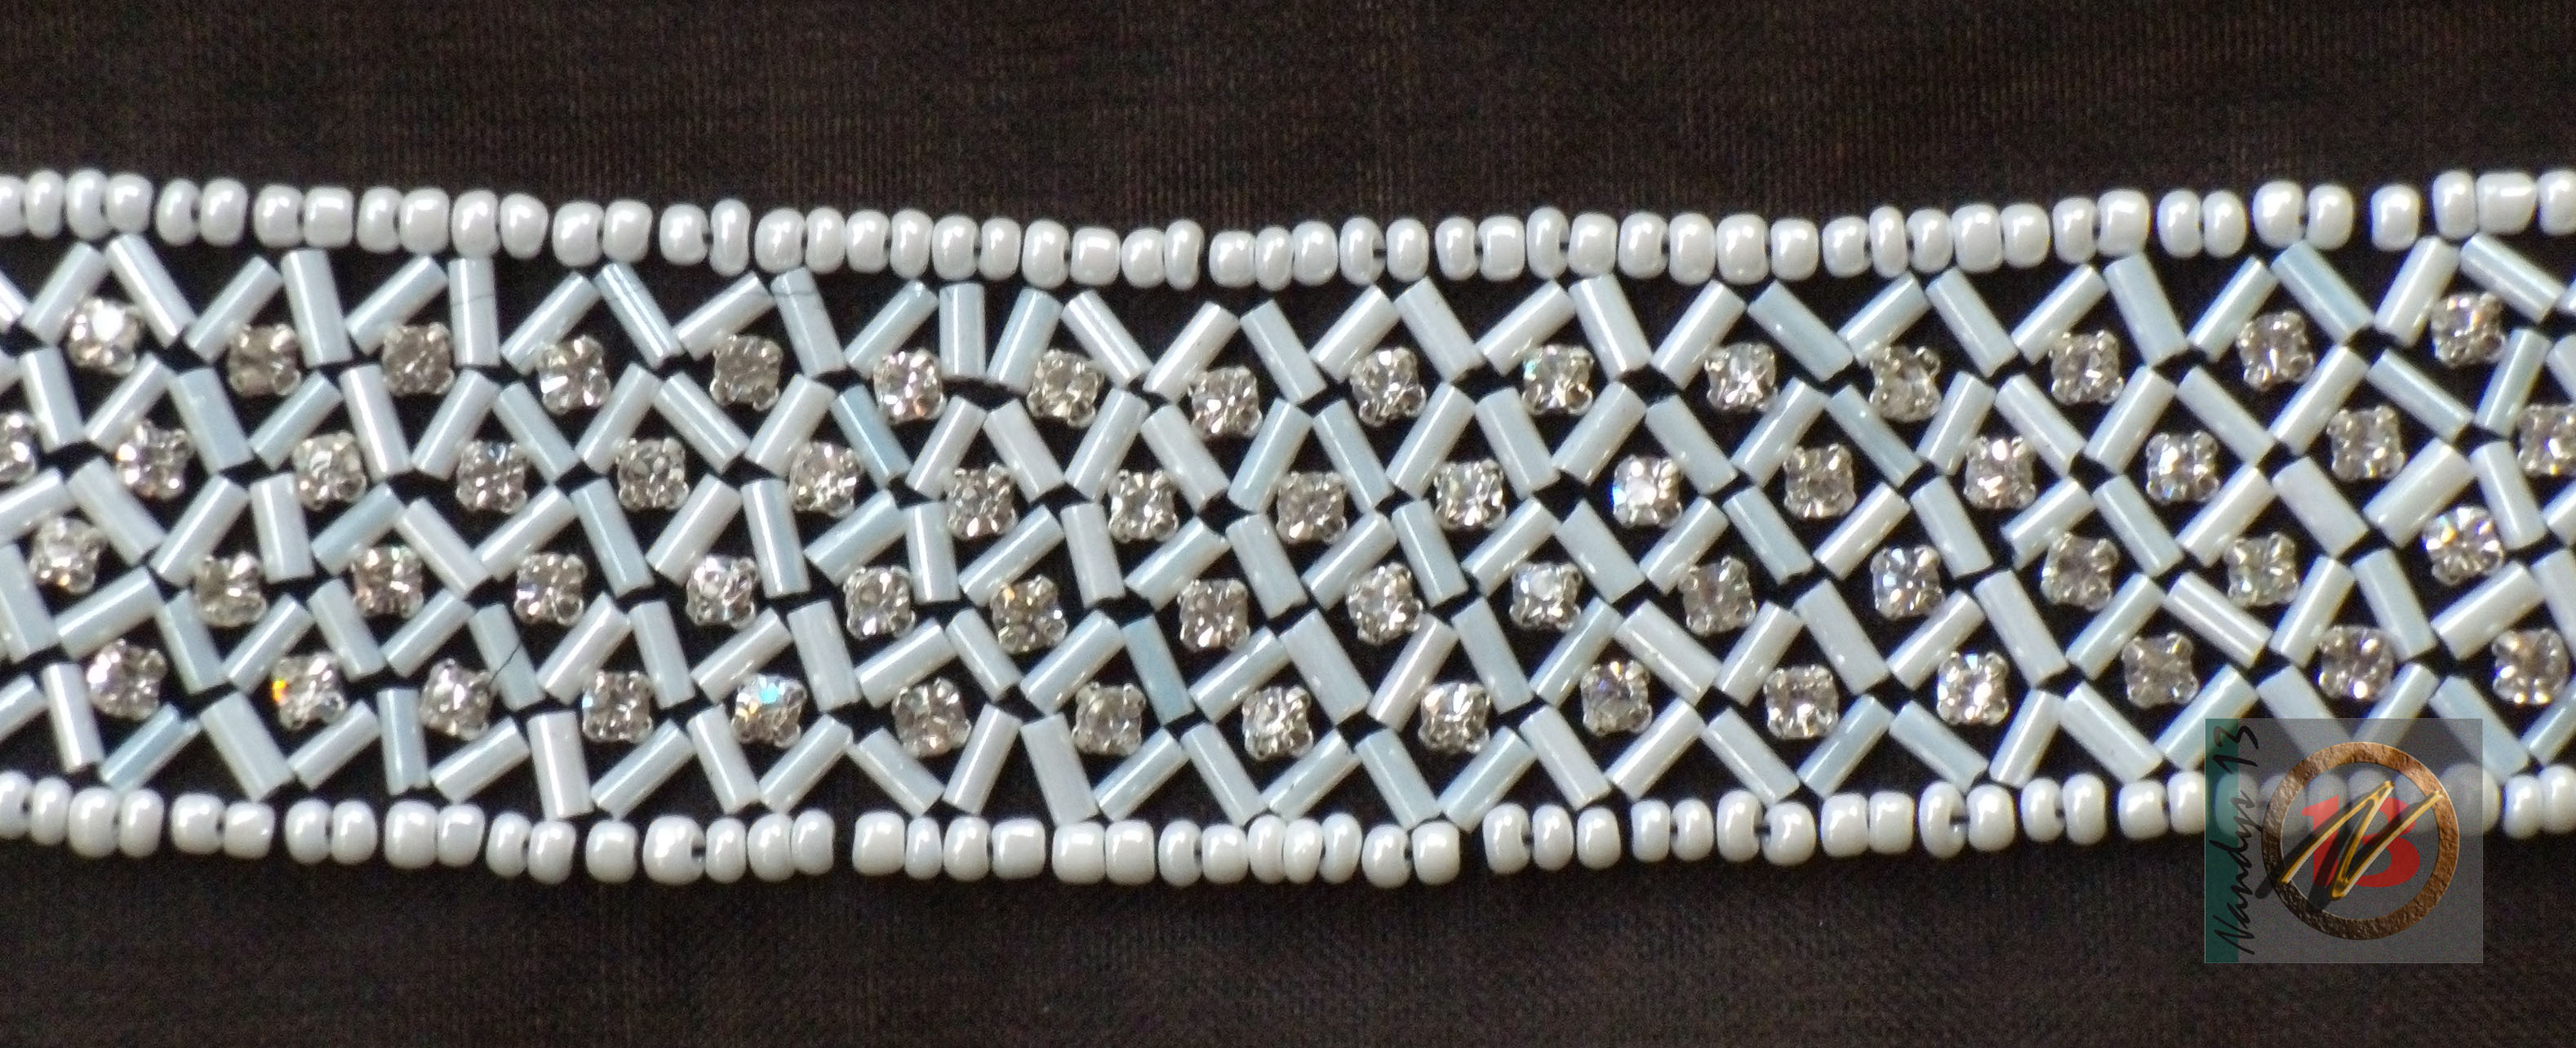 Manufacturers Exporters and Wholesale Suppliers of Beaded Trim Border Kolkata West Bengal